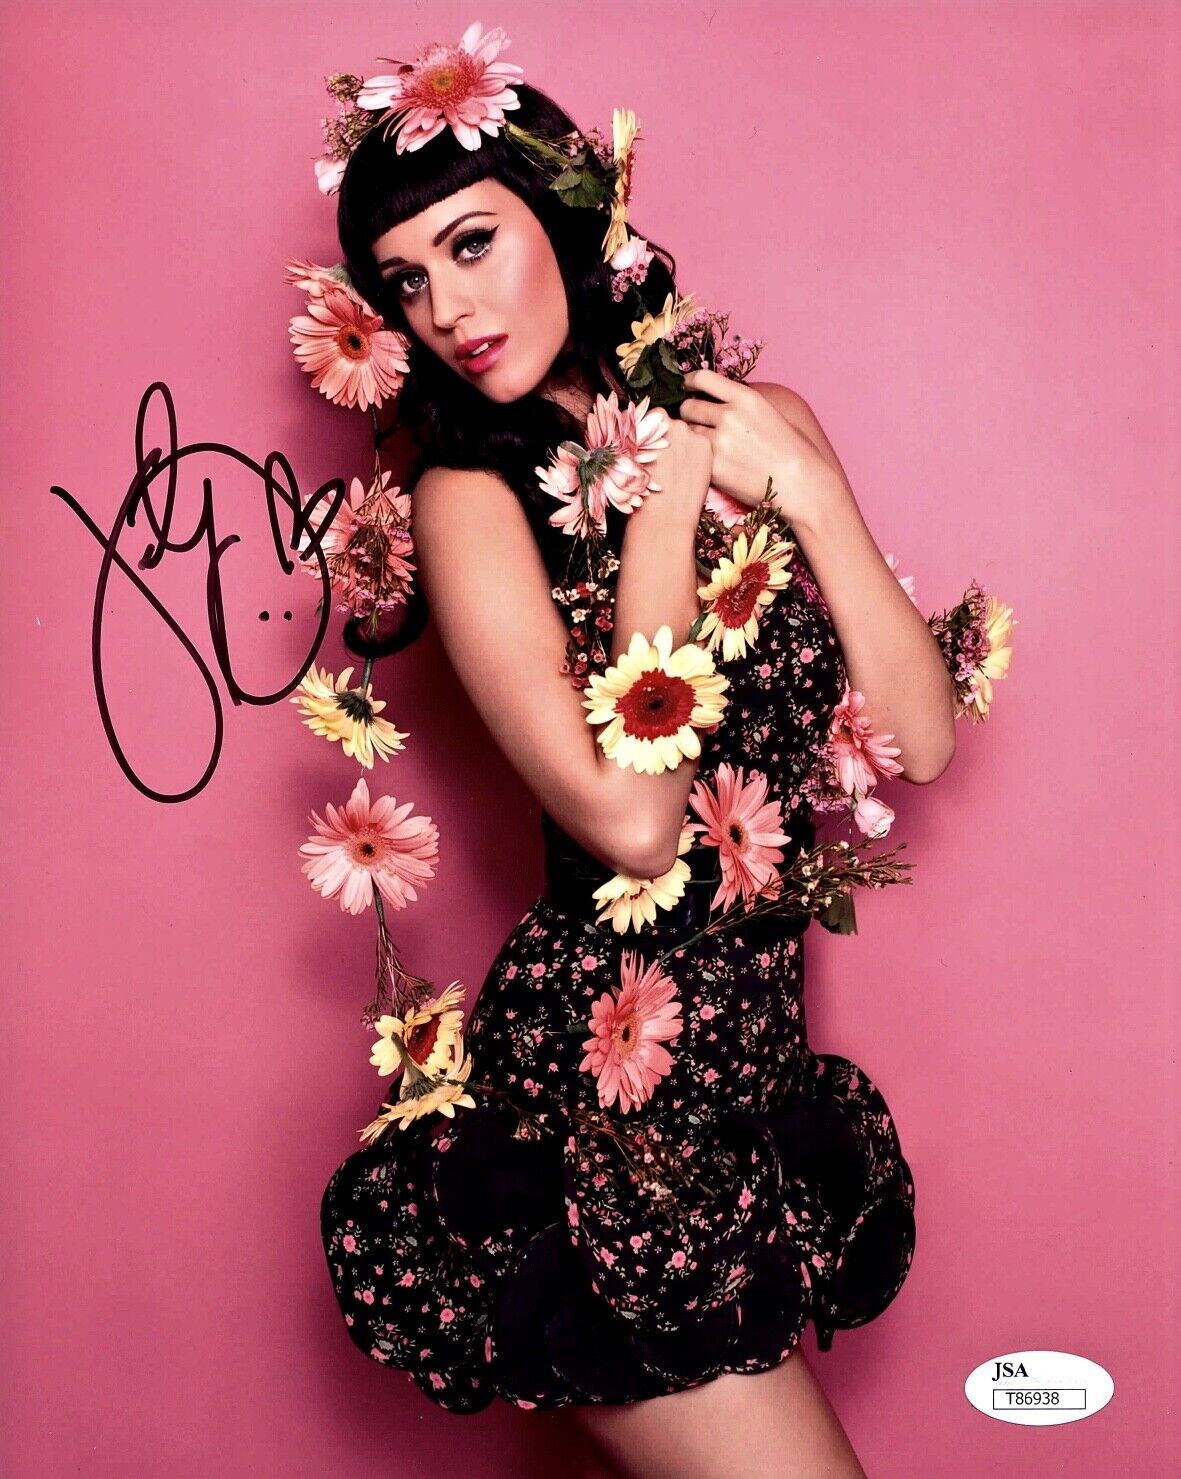 KATY PERRY Autographed Hand SIGNED 8x10 Photo Poster painting JSA CERTIFIED AUTHENTIC BEAUTIFUL!